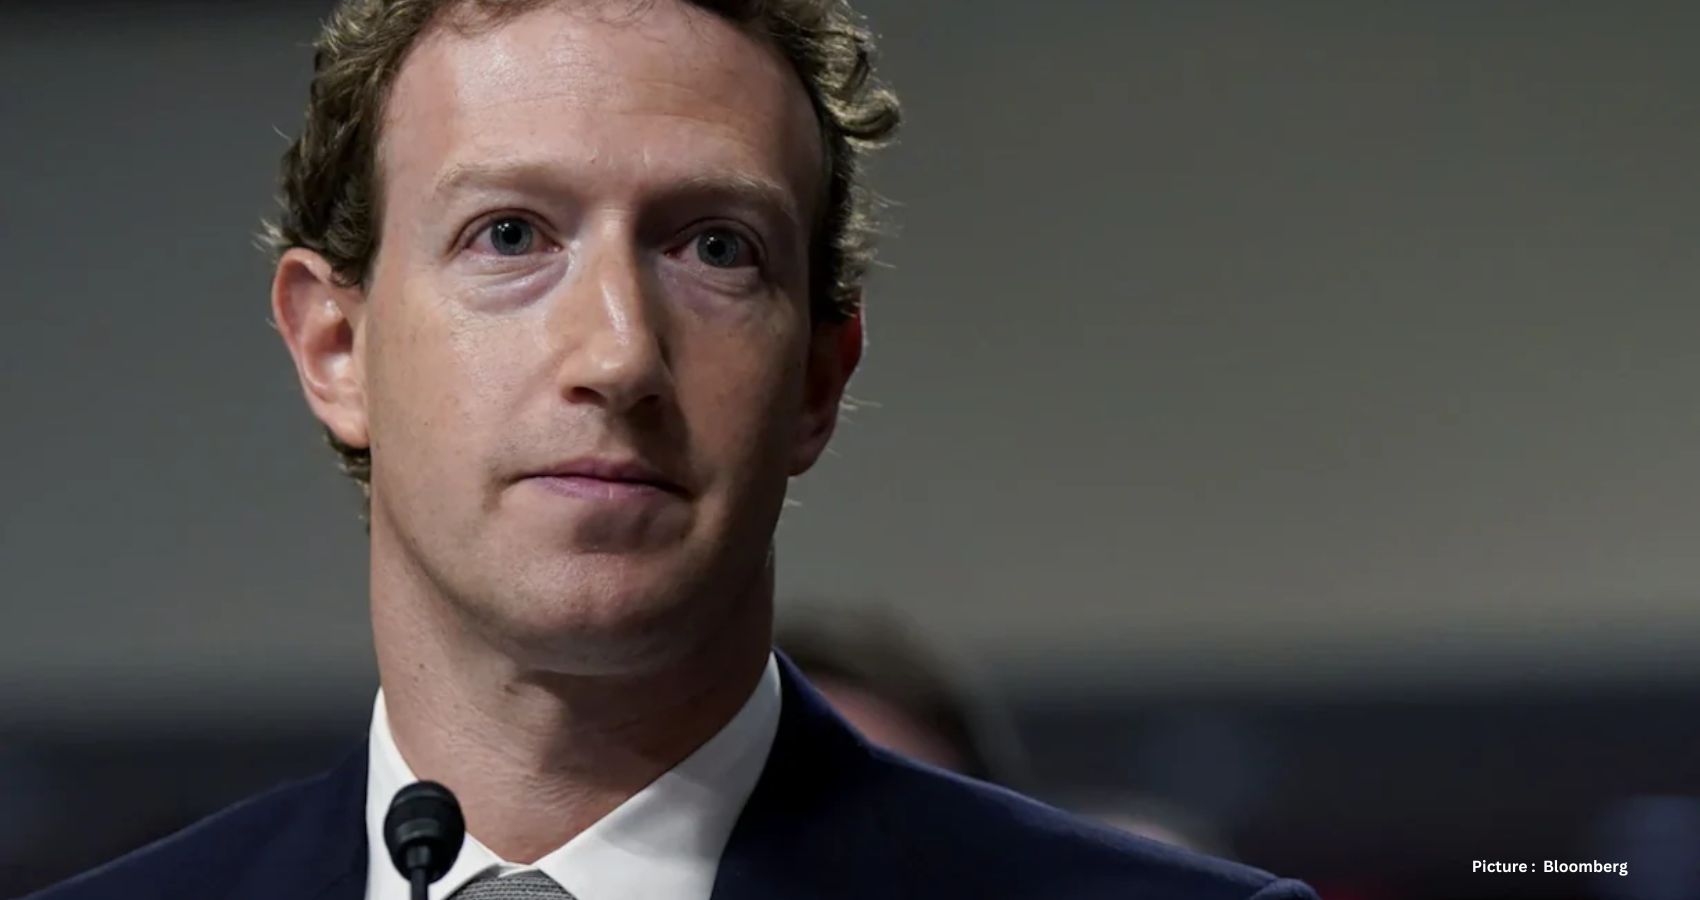 Featured & Cover Zuckerberg's Wealth Soars as Meta Beats Expectations Billionaire's Net Worth Surges by $29 Billion in One Day